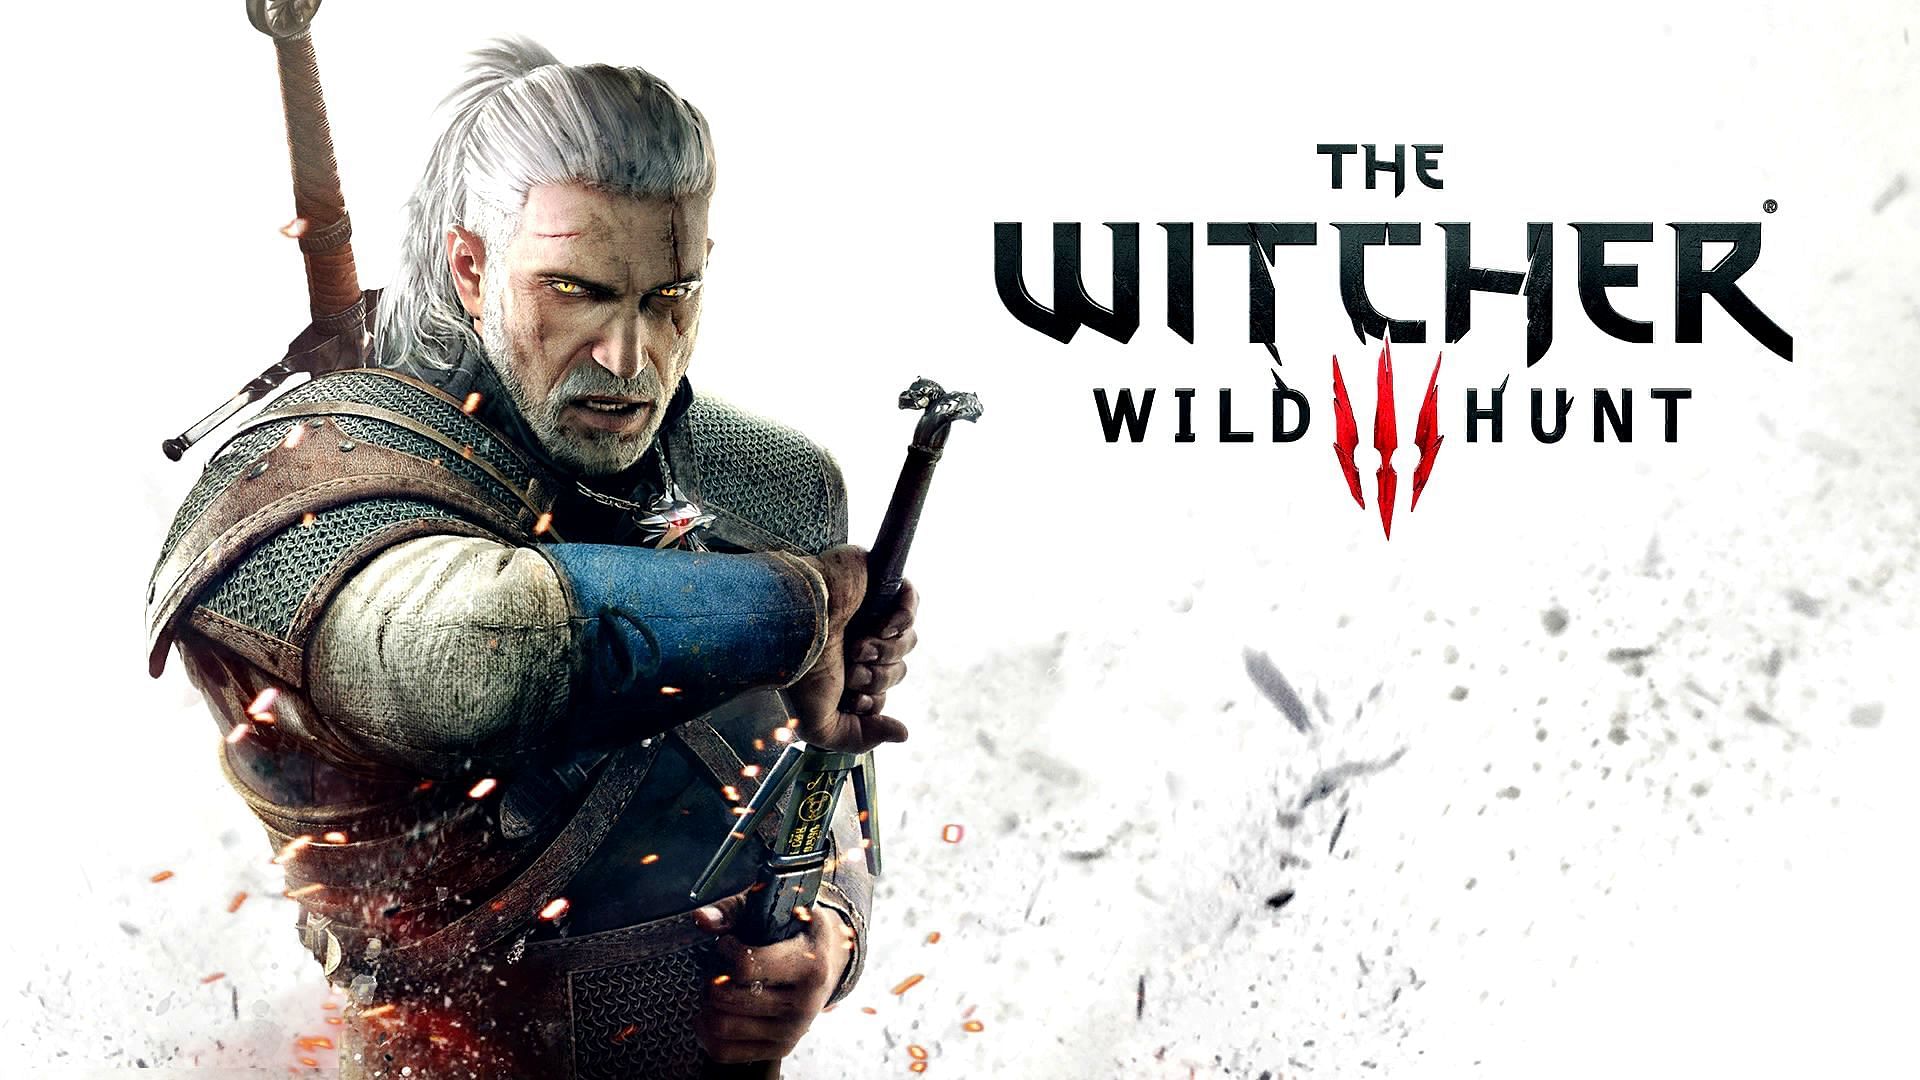 Cover art for The Witcher 3: The Wild Hunt (Image via CD Projekt Red)